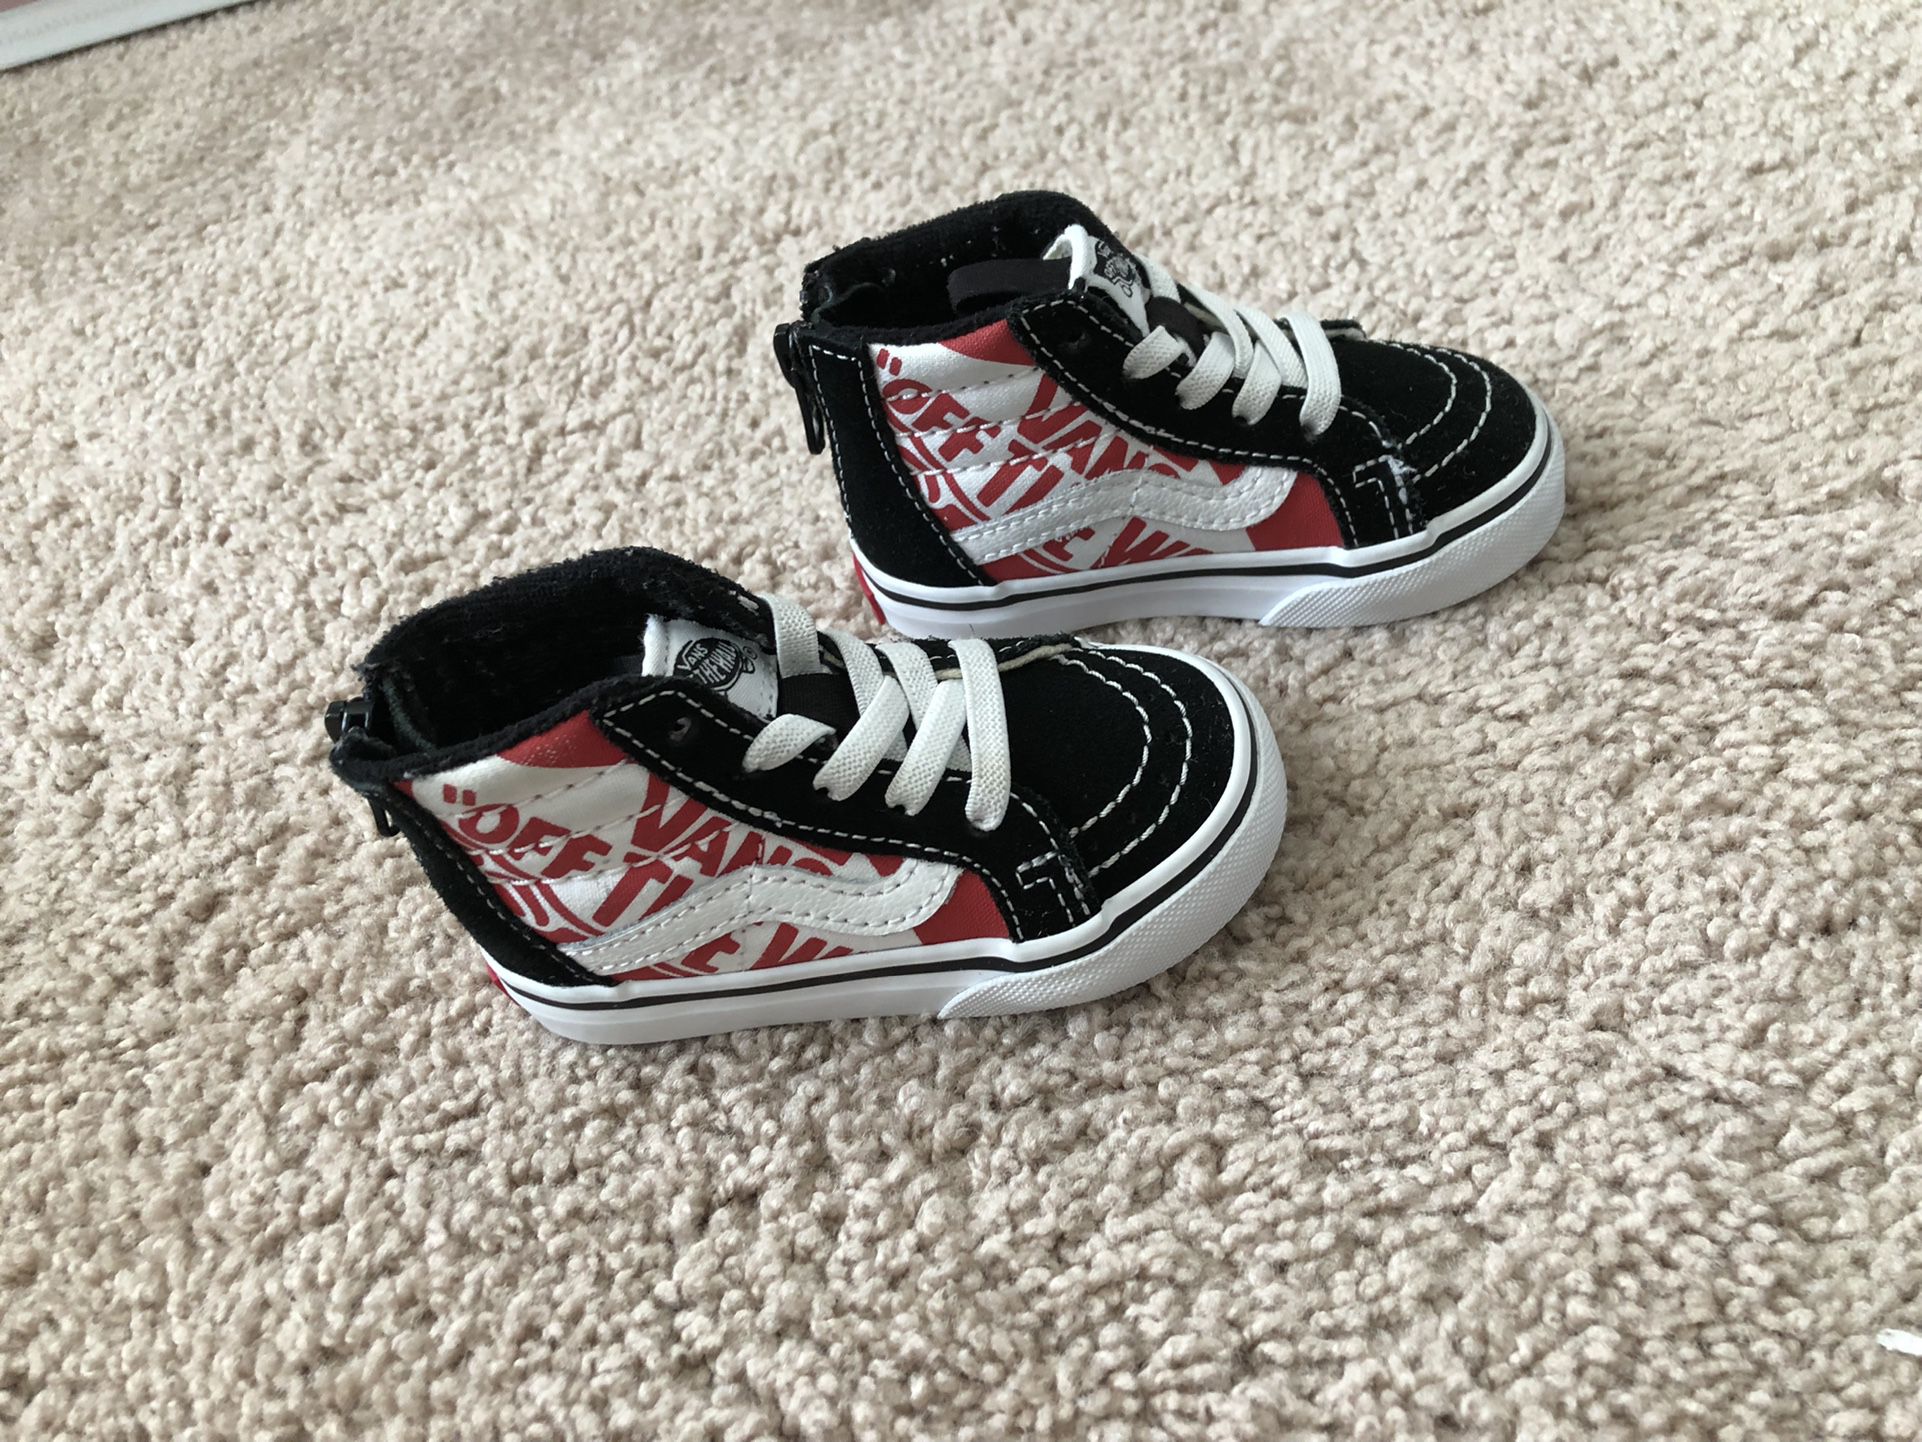 Vans For Toddlers Size 4.5c 